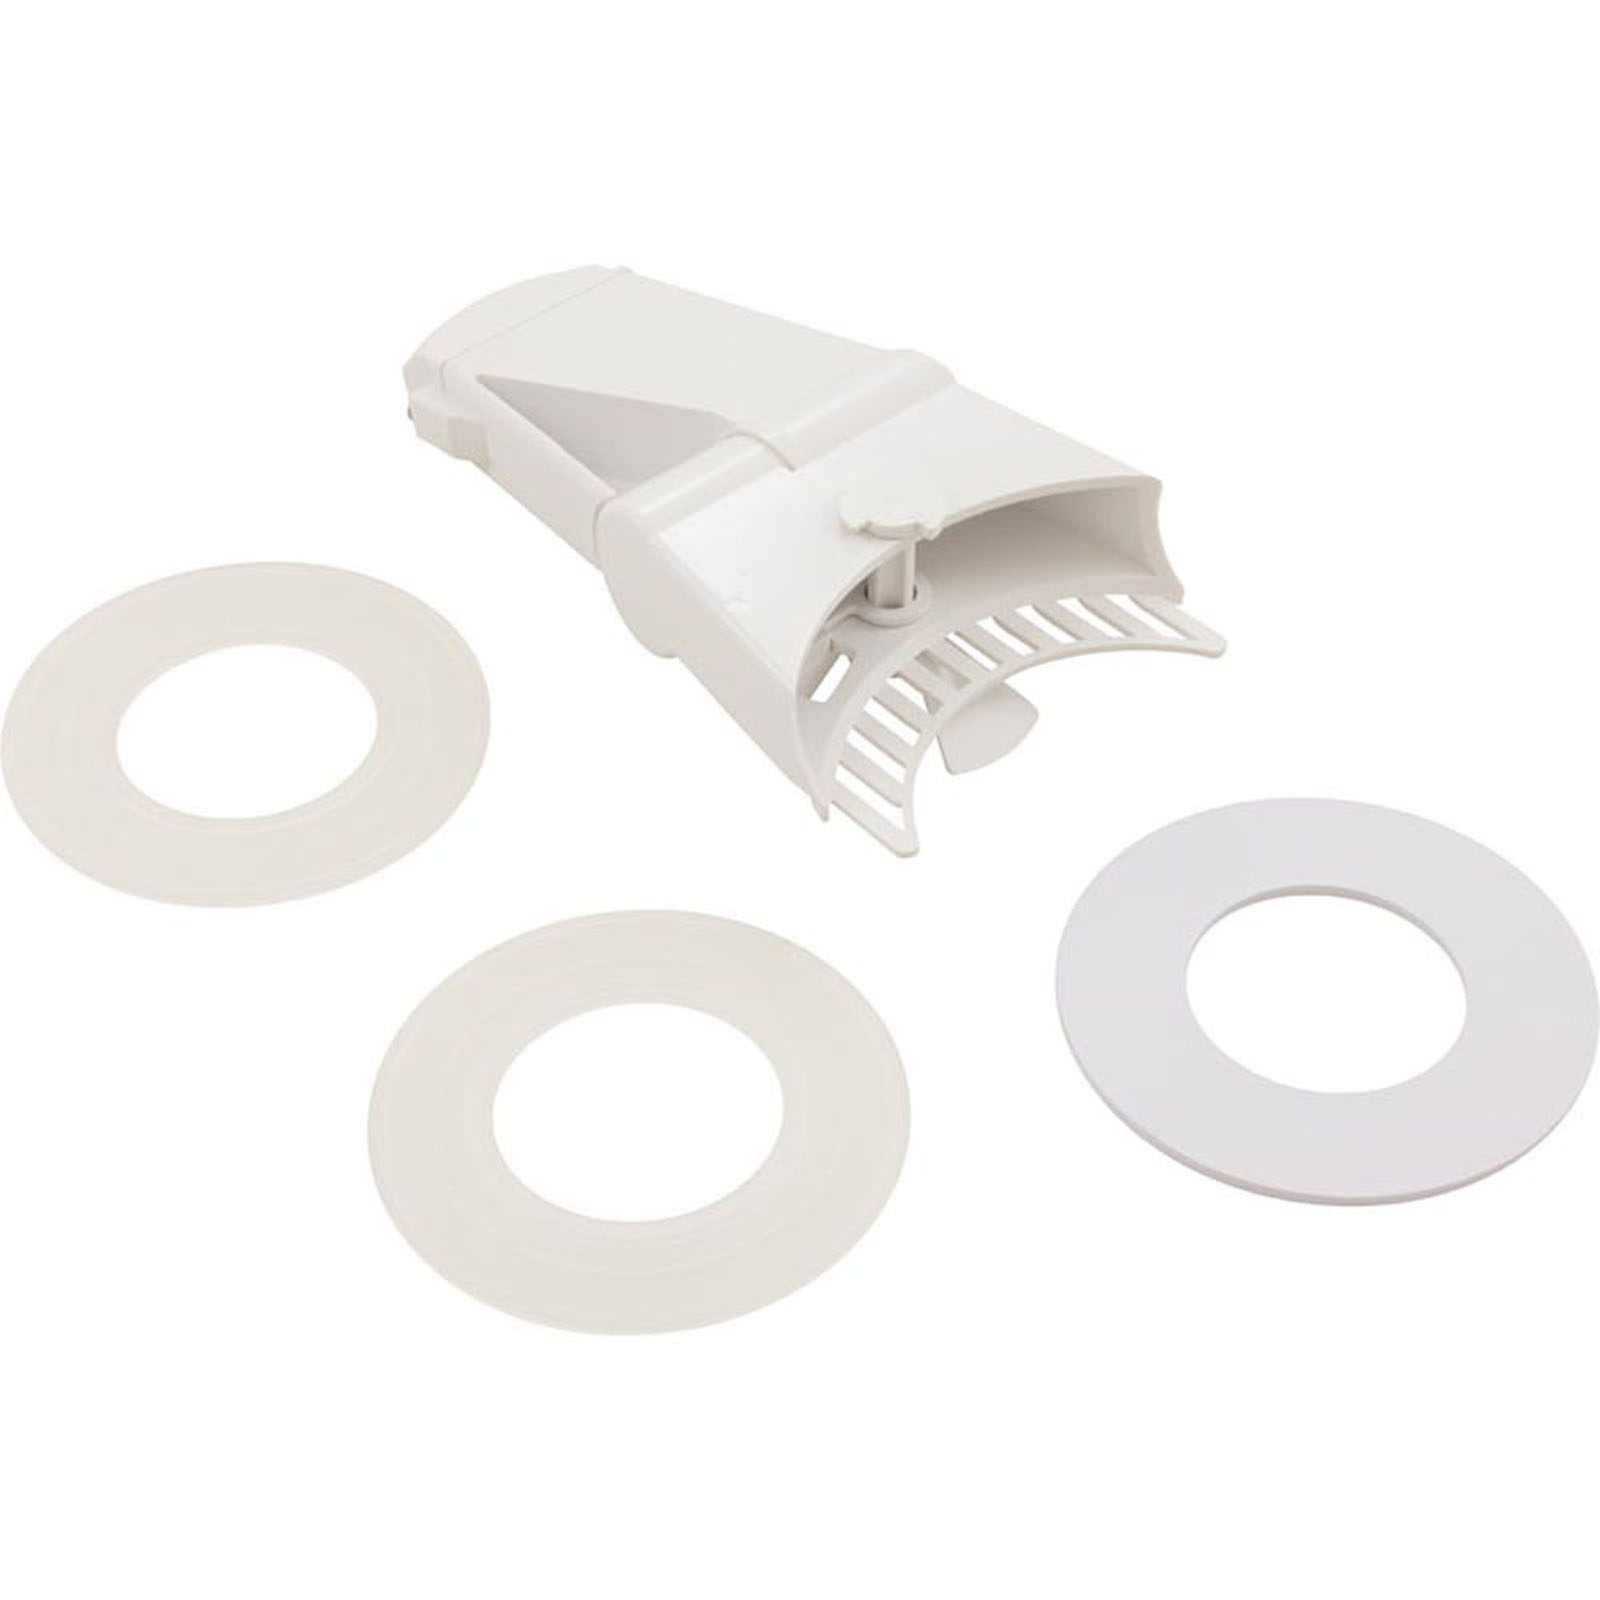 PENTAIR POOL PRODUCTS Kit Ftg Rtn Fountain Assembly